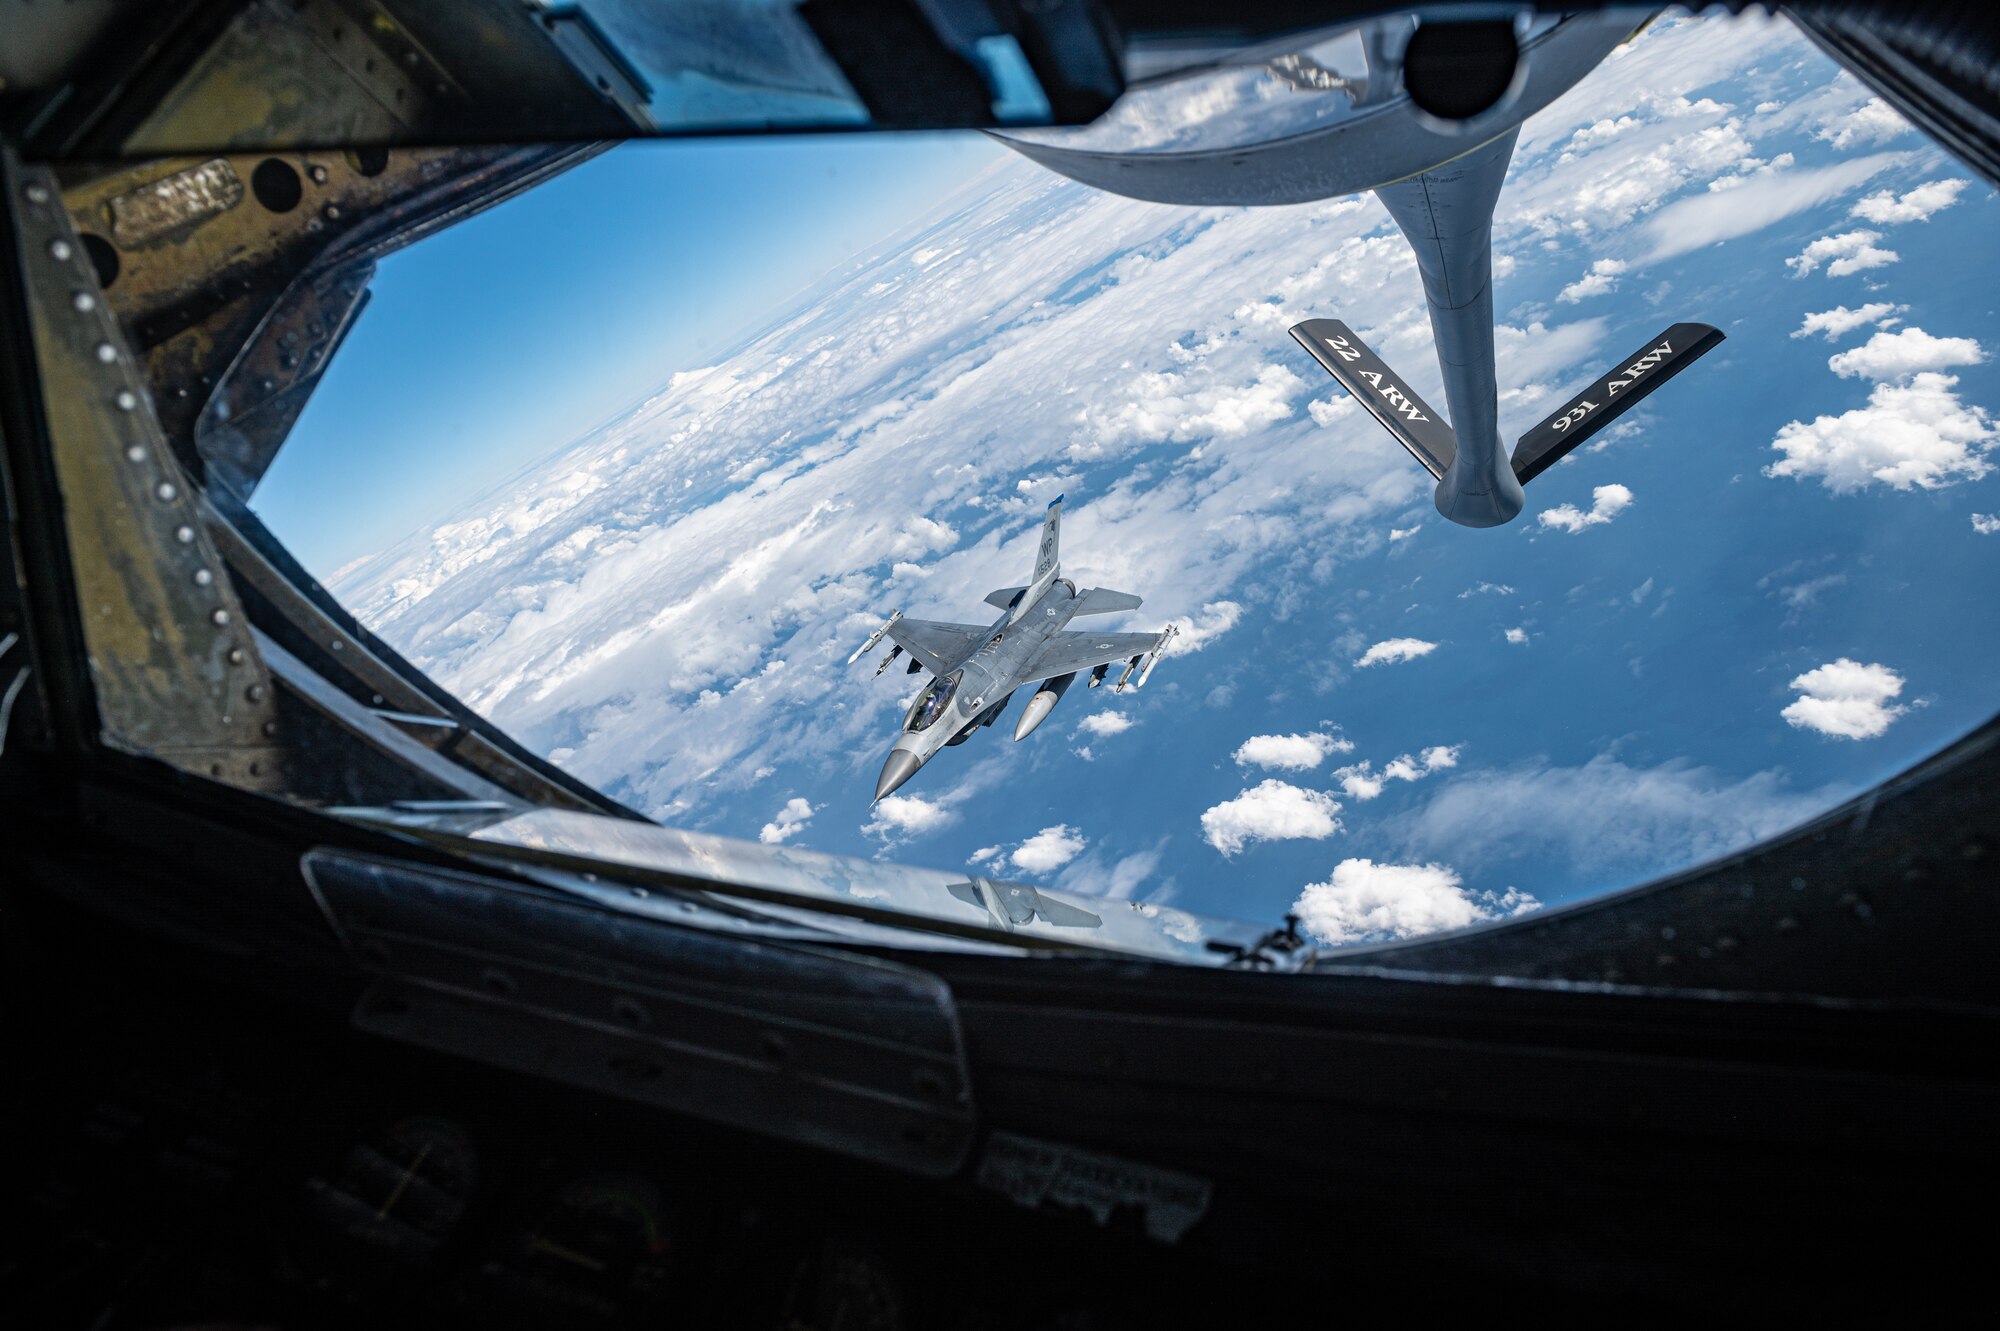 An F-16 Fighting Falcon departs after receiving fuel from a KC-135 Stratotanker